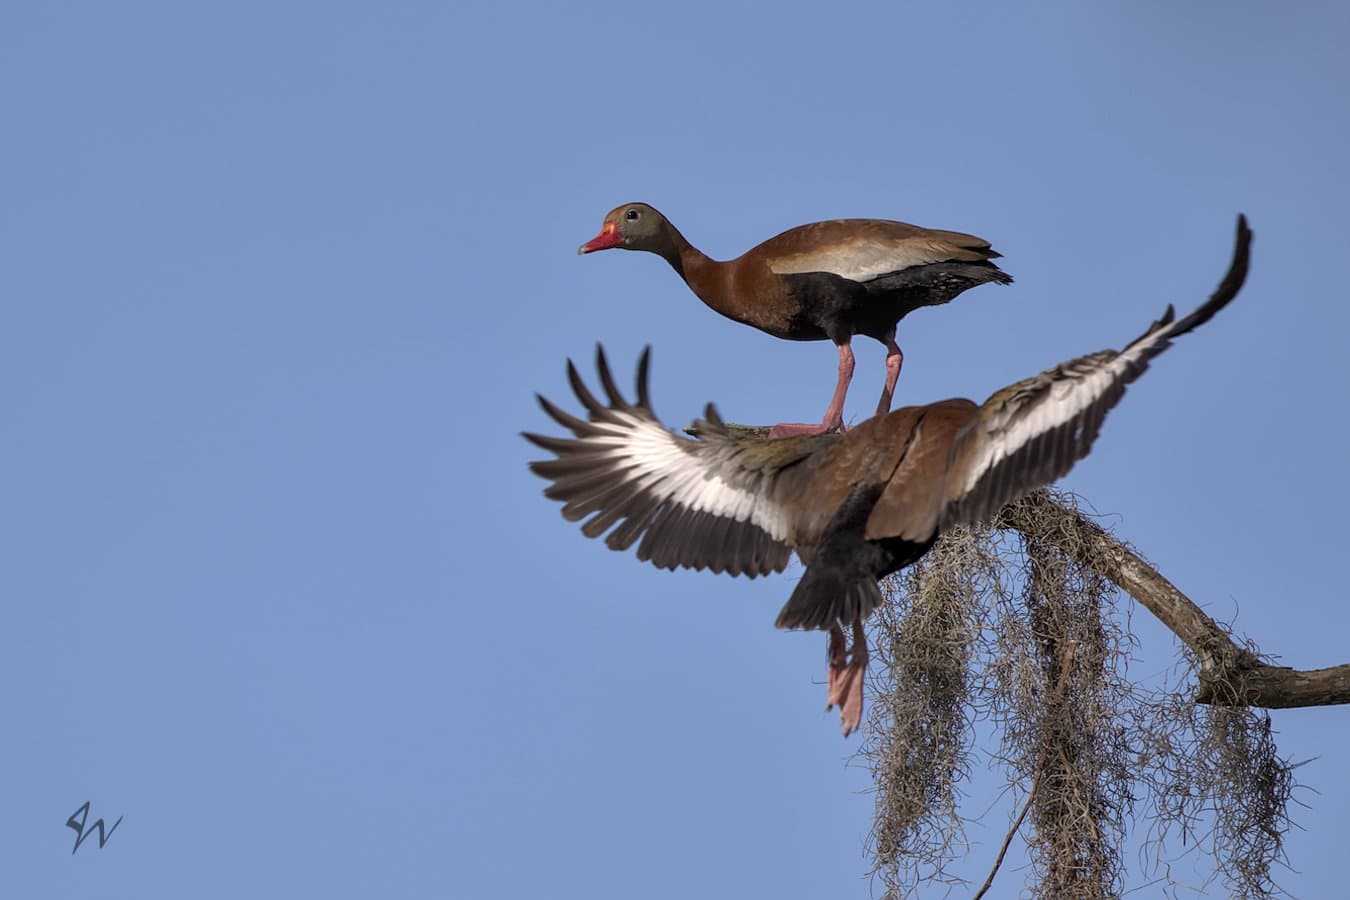 Black-bellied Whistling Duck appears to be surfing upon back of another flying at it upon high branch.